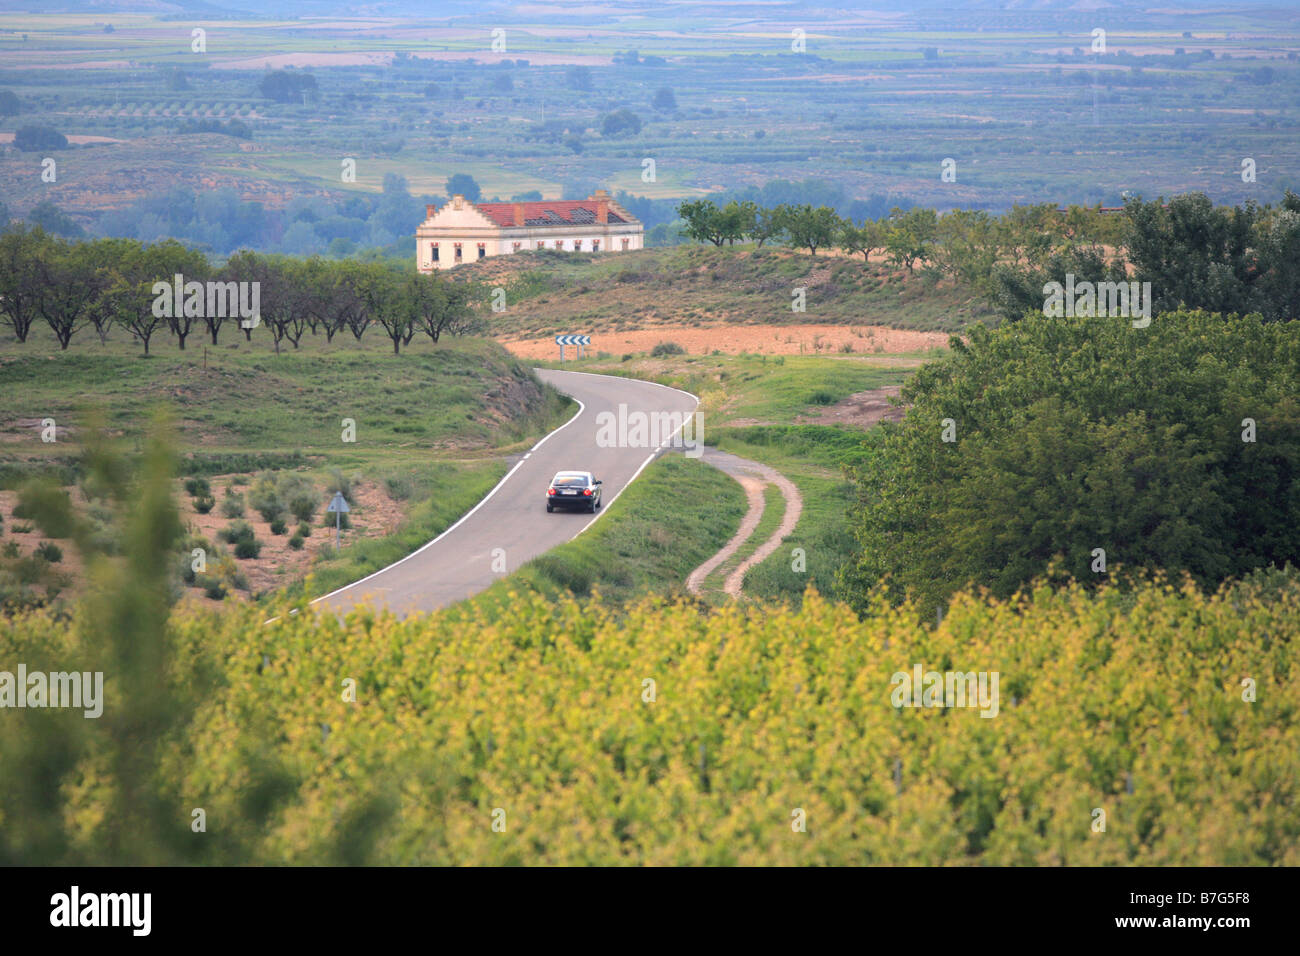 Vines and road in Spain Stock Photo